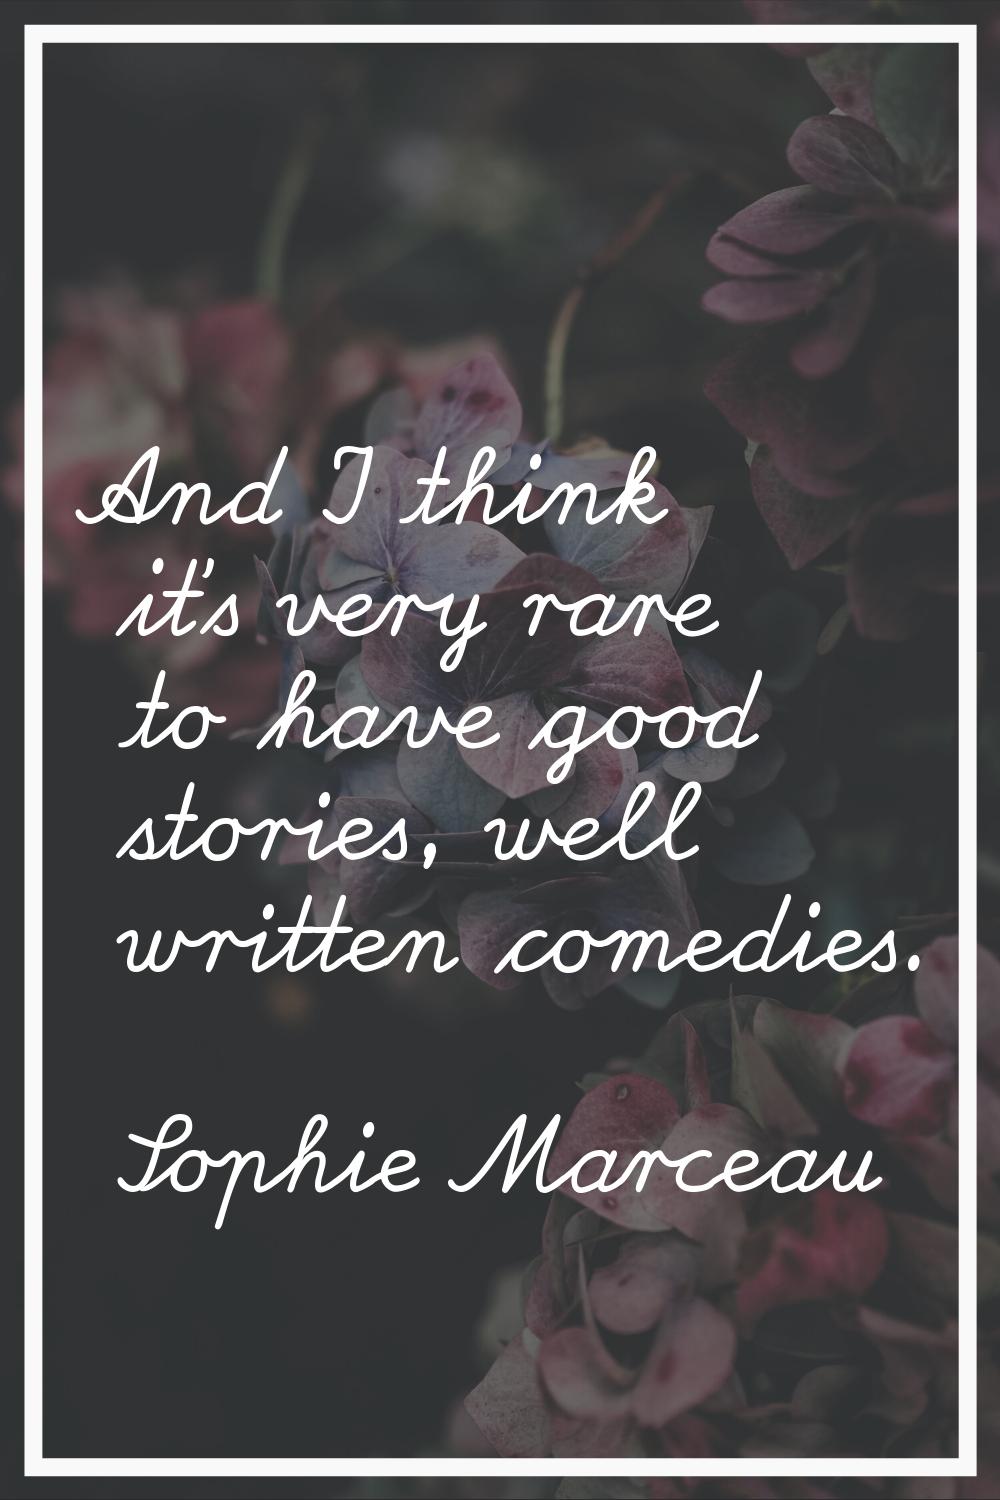 And I think it's very rare to have good stories, well written comedies.